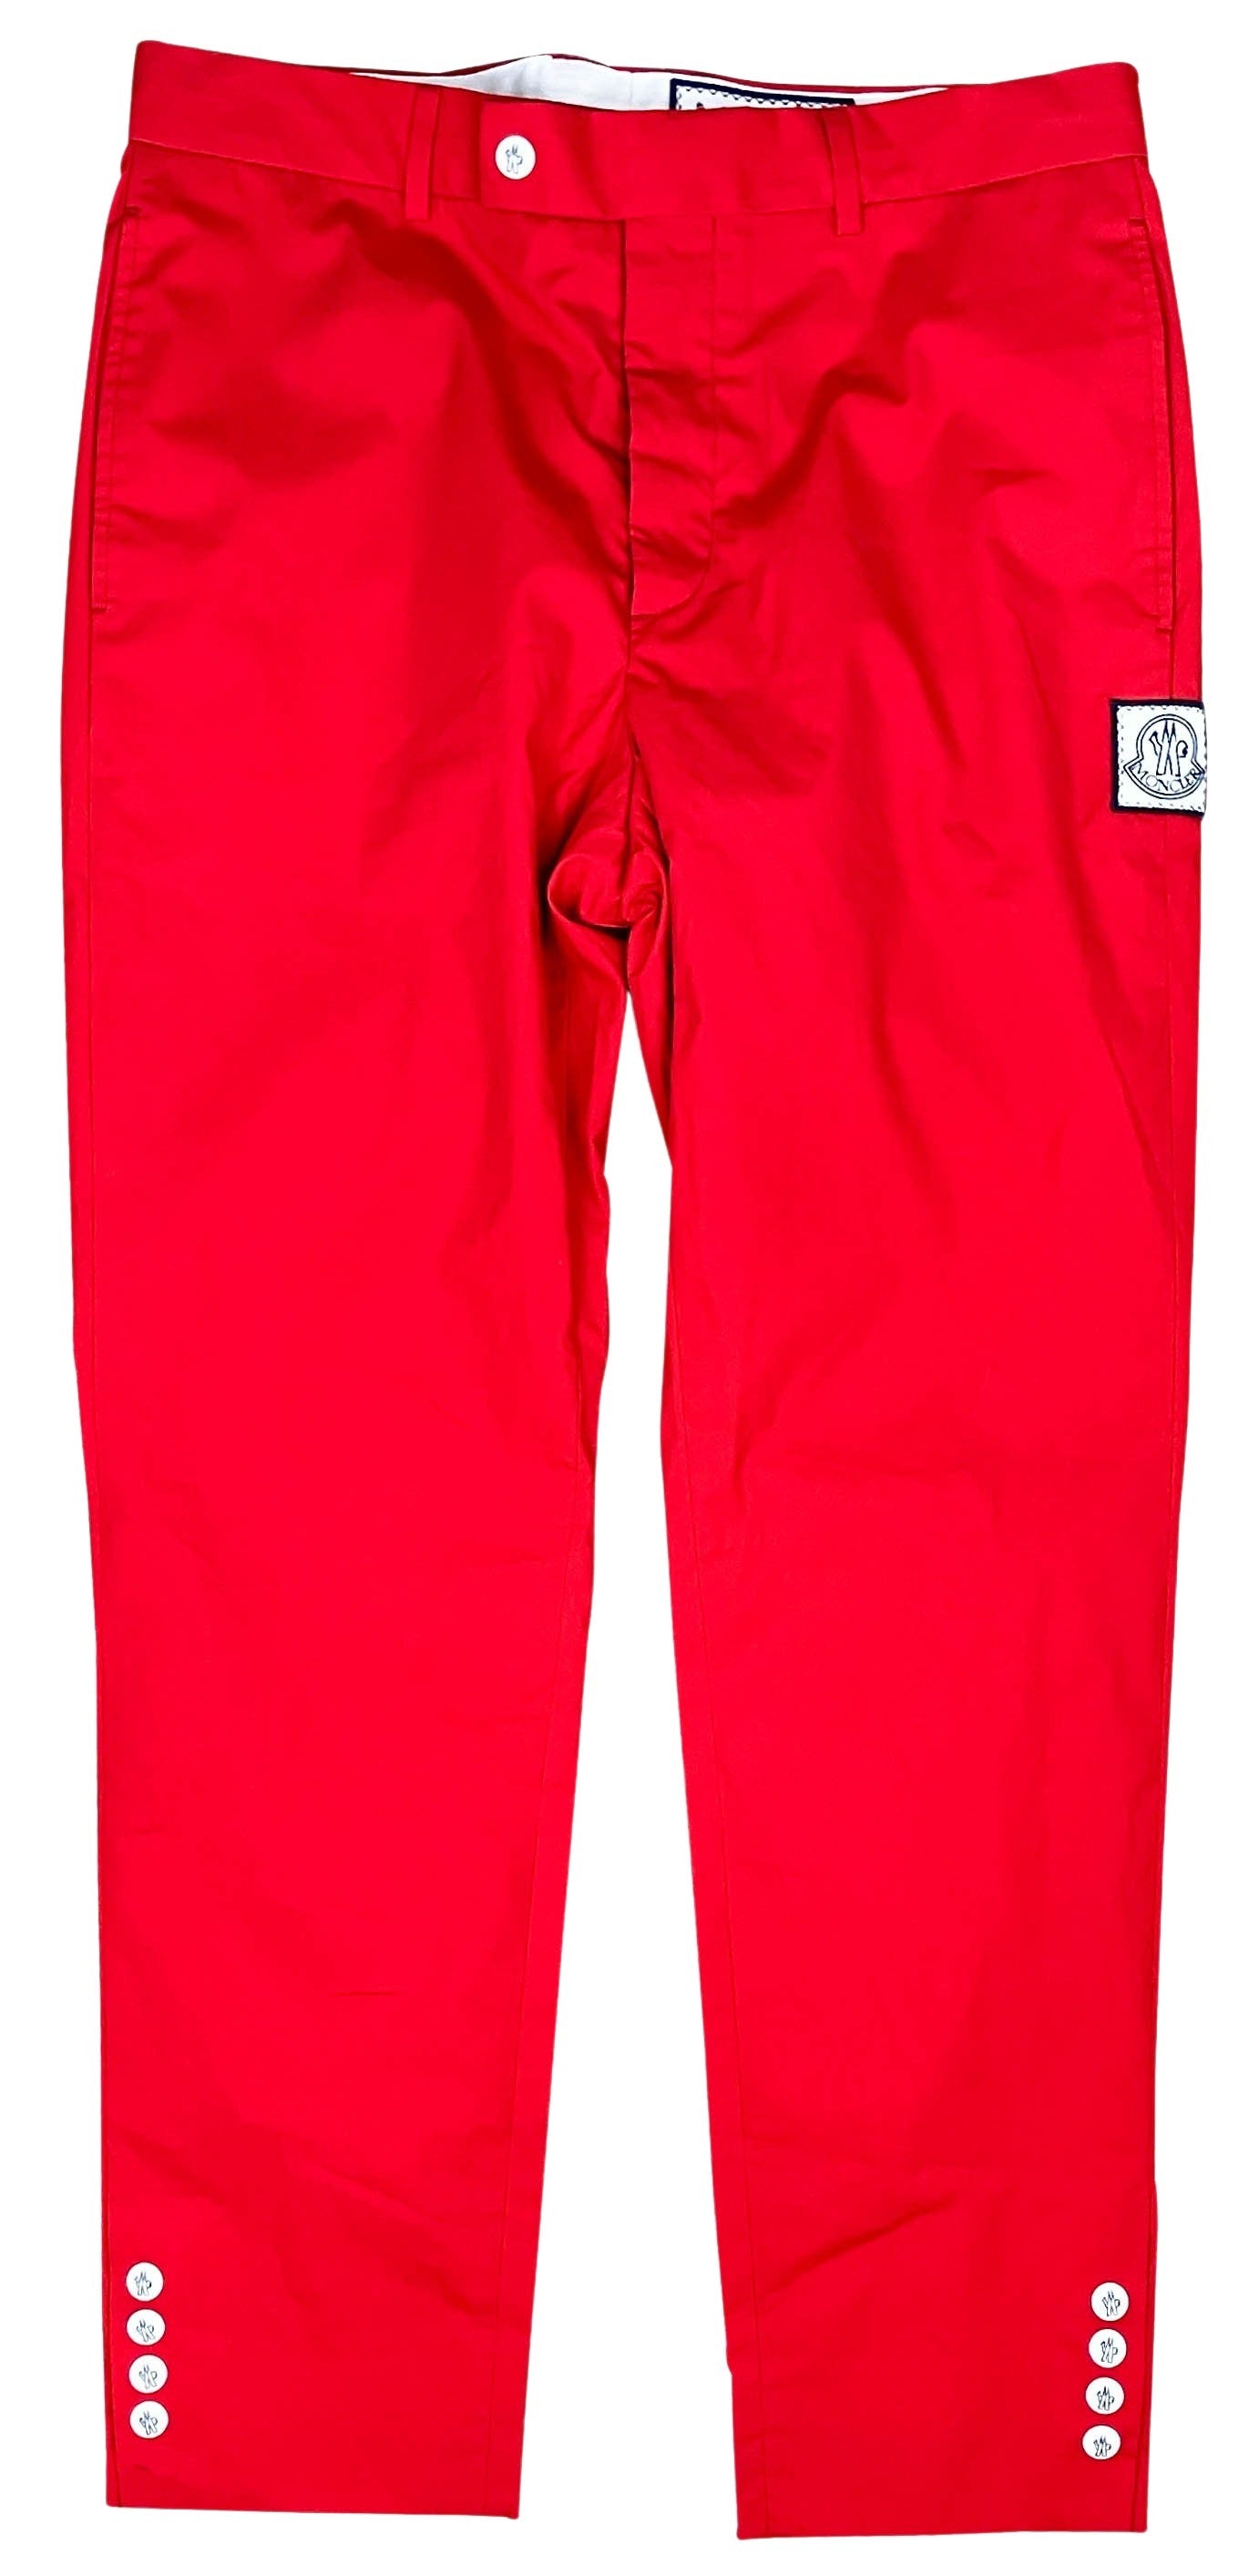 Moncler Gamme Bleu Trousers in Red - Discounts on Moncler at UAL